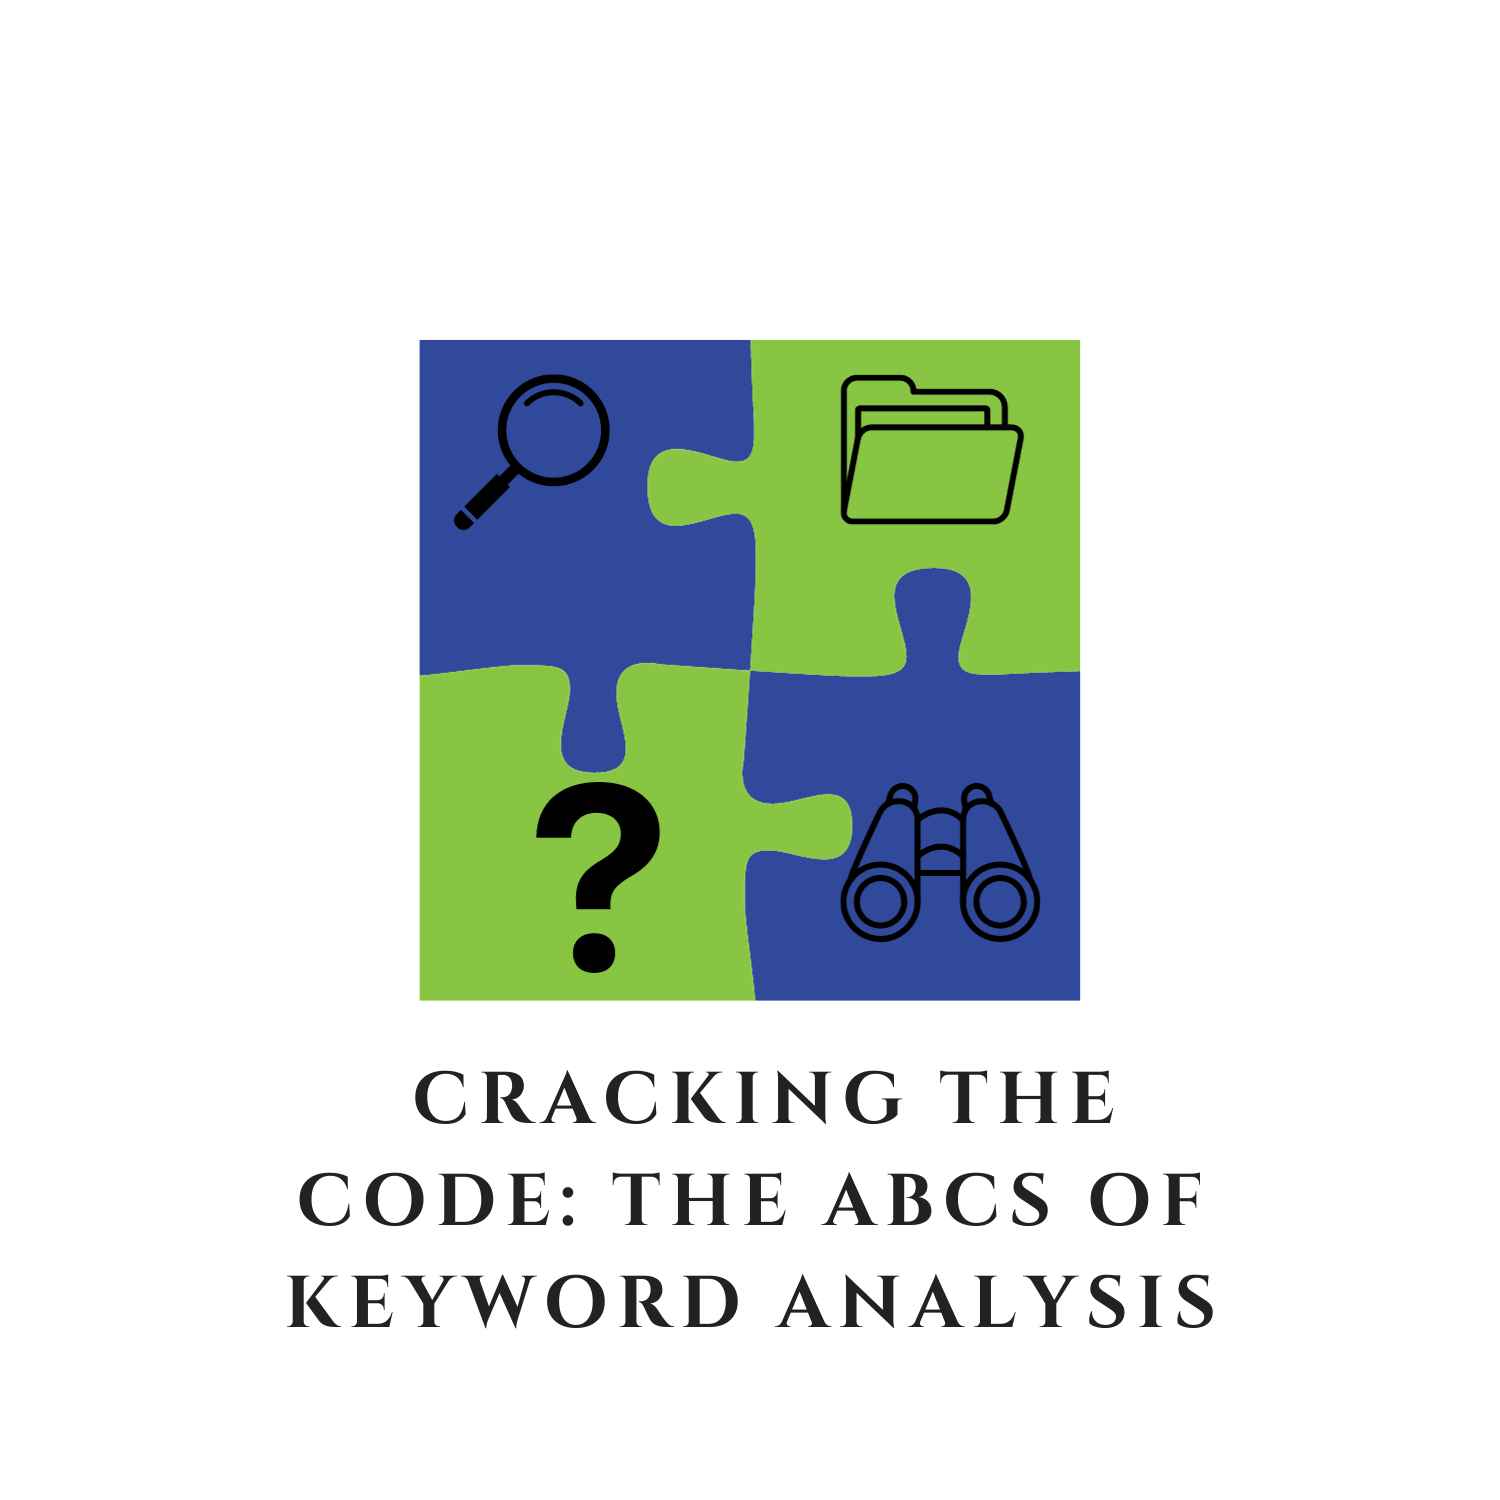 Cracking the Code: The ABCs of Keyword Analysis